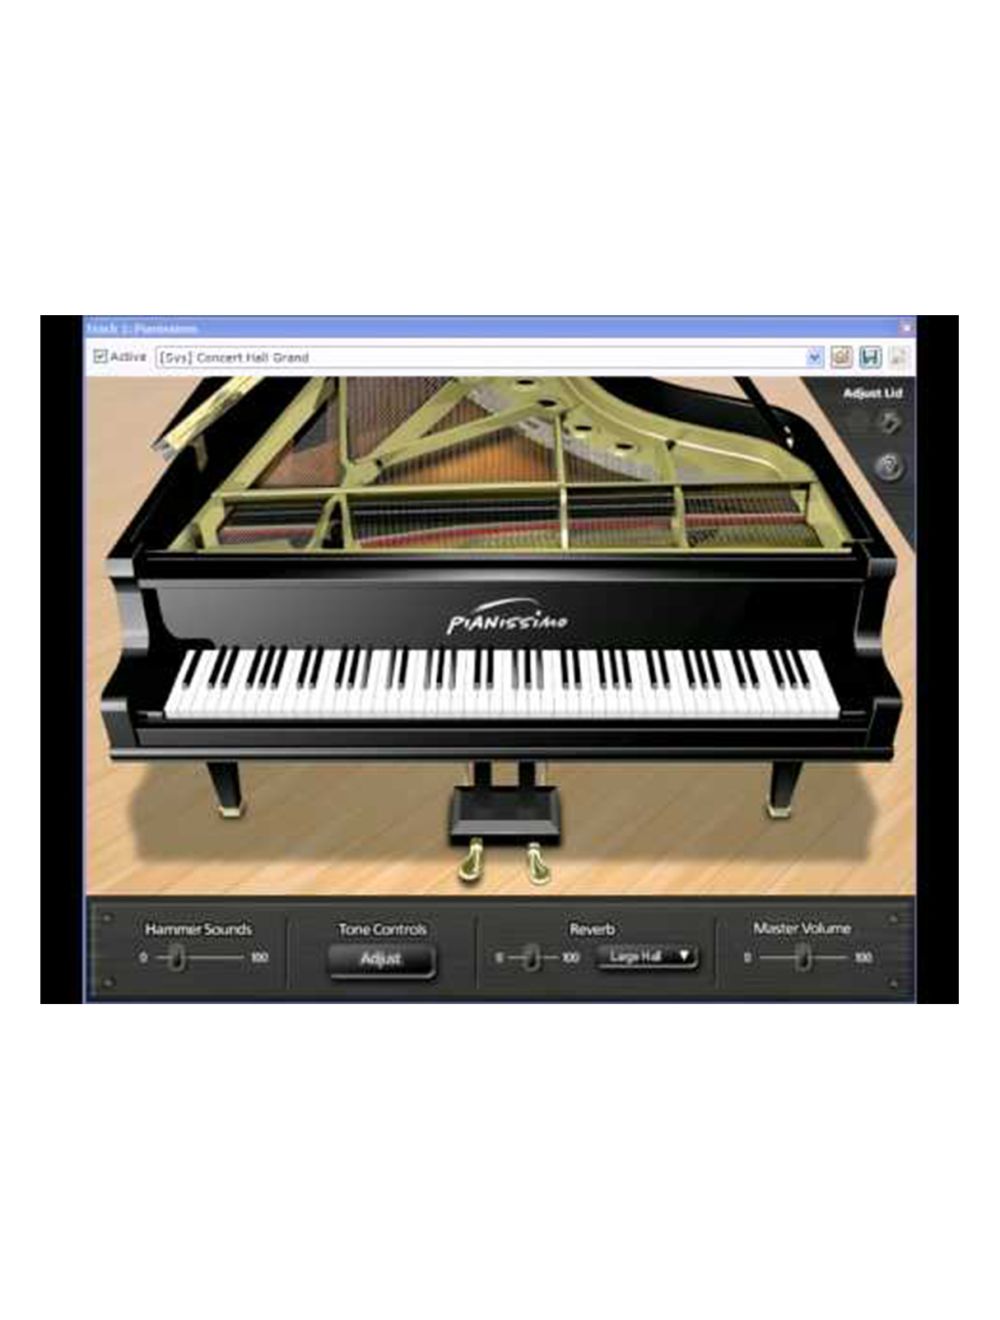 Acoustica Pianissimo Piano (Instant Software Download)